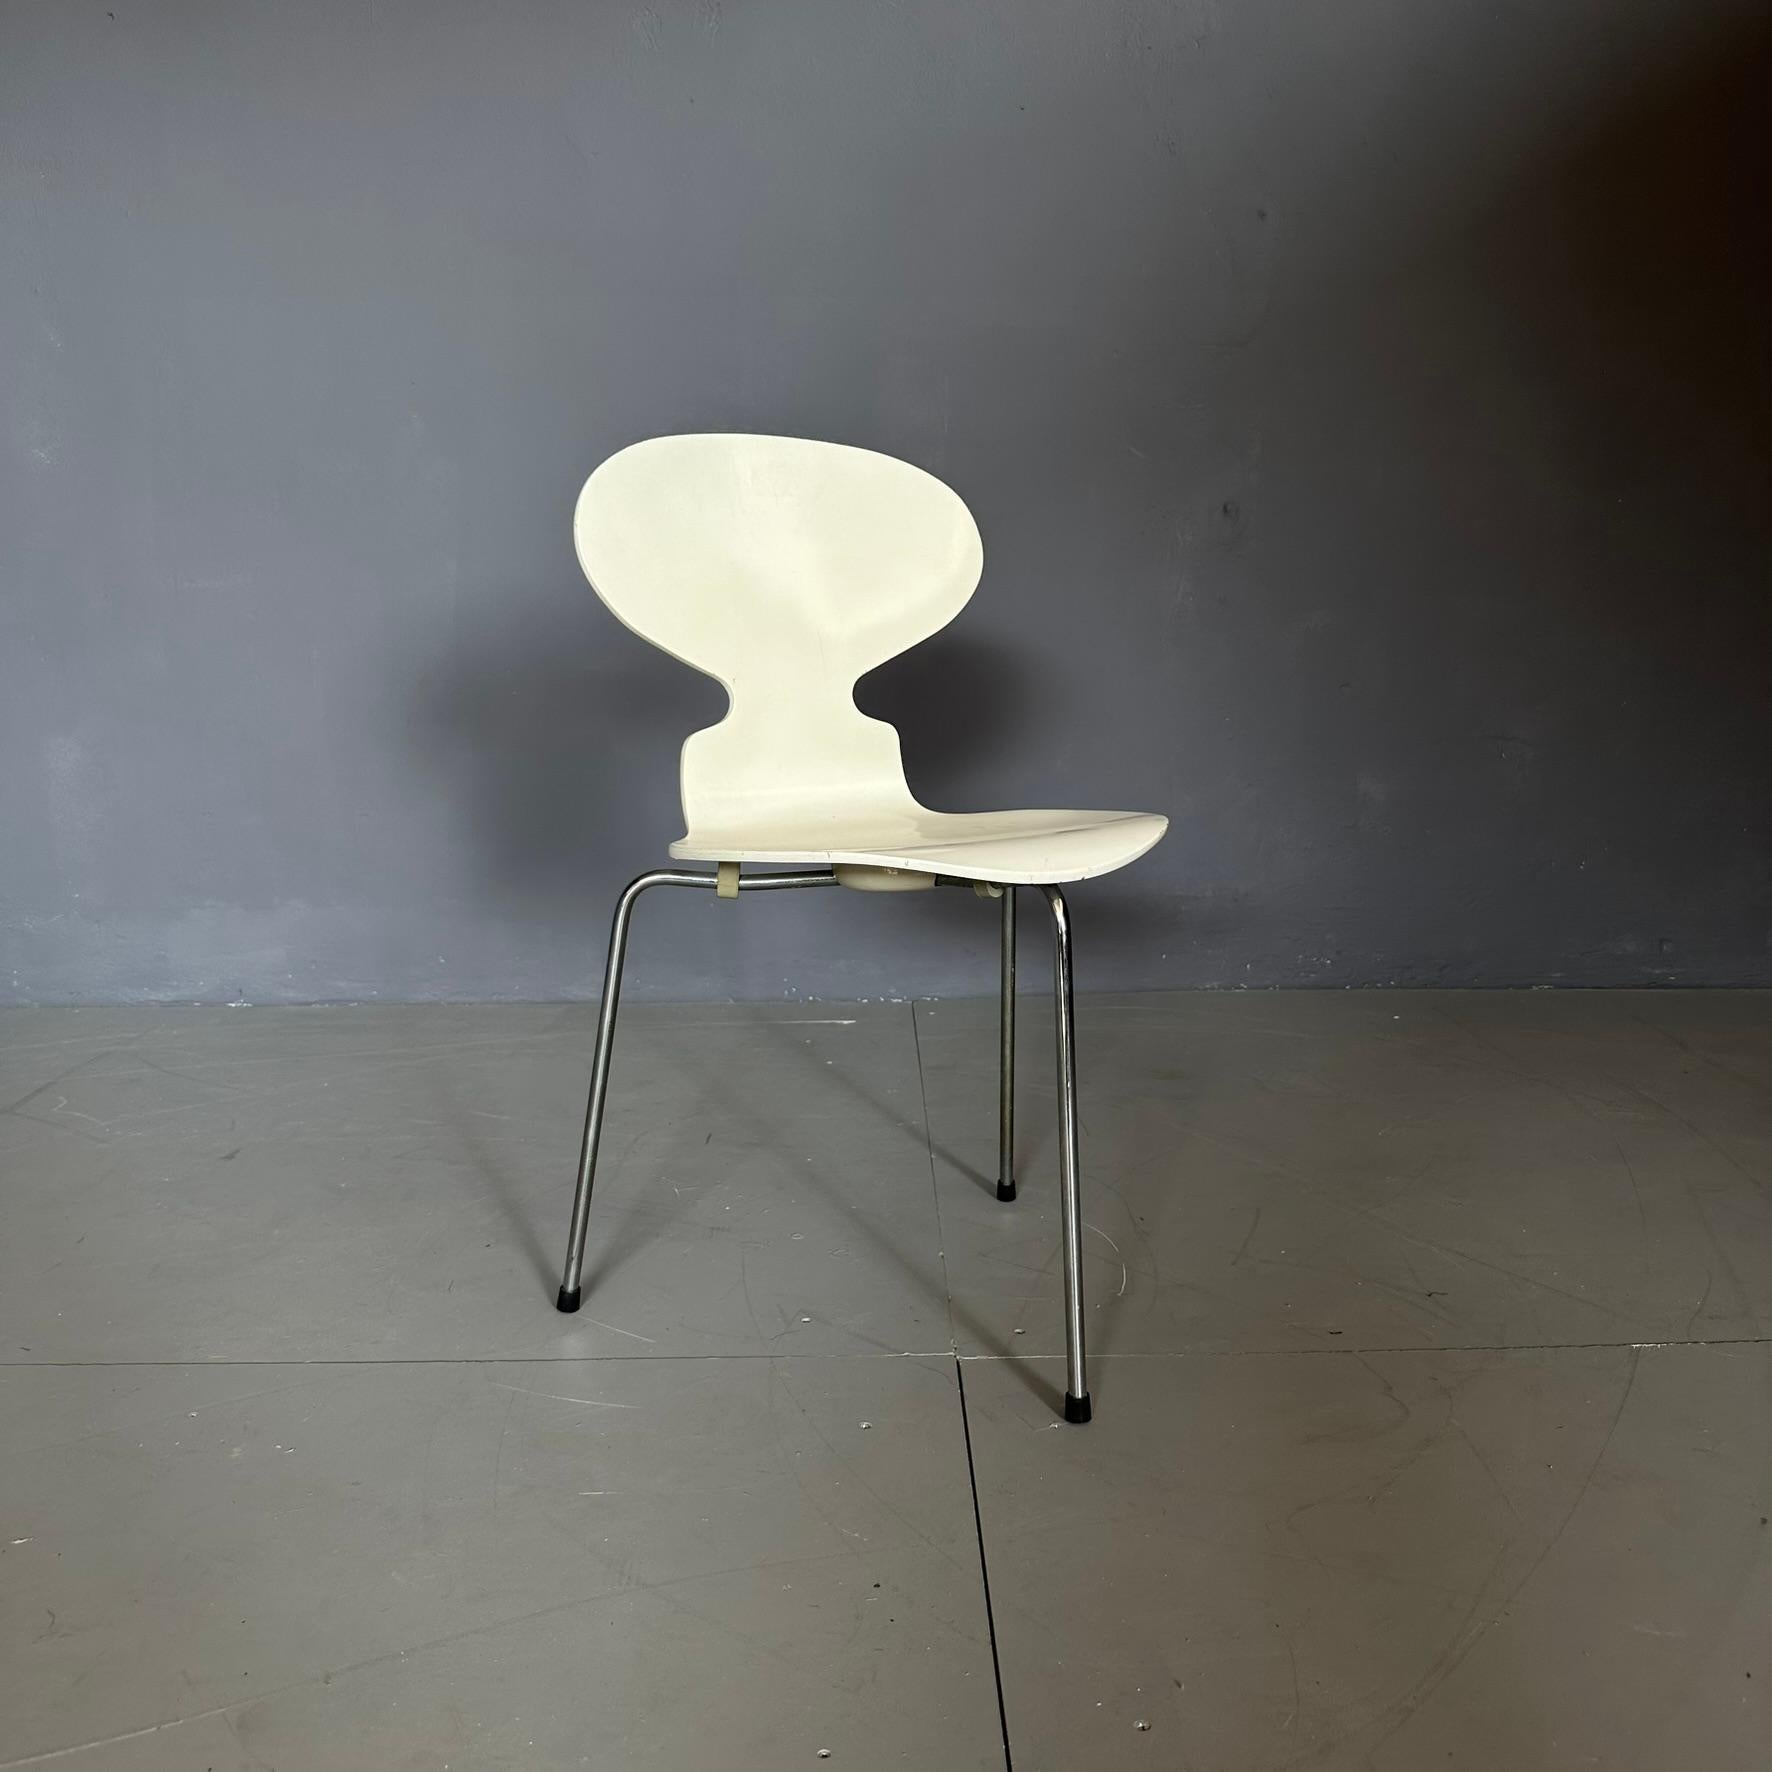 ANT 3100 chair, design by Jacobsen Hansen for Fritz, Swedish manufacturing.
The chair is made of white bent wood with three metal legs.
The curvature of the wood enhances the beauty and particularity of this model.
The production mark is visible on